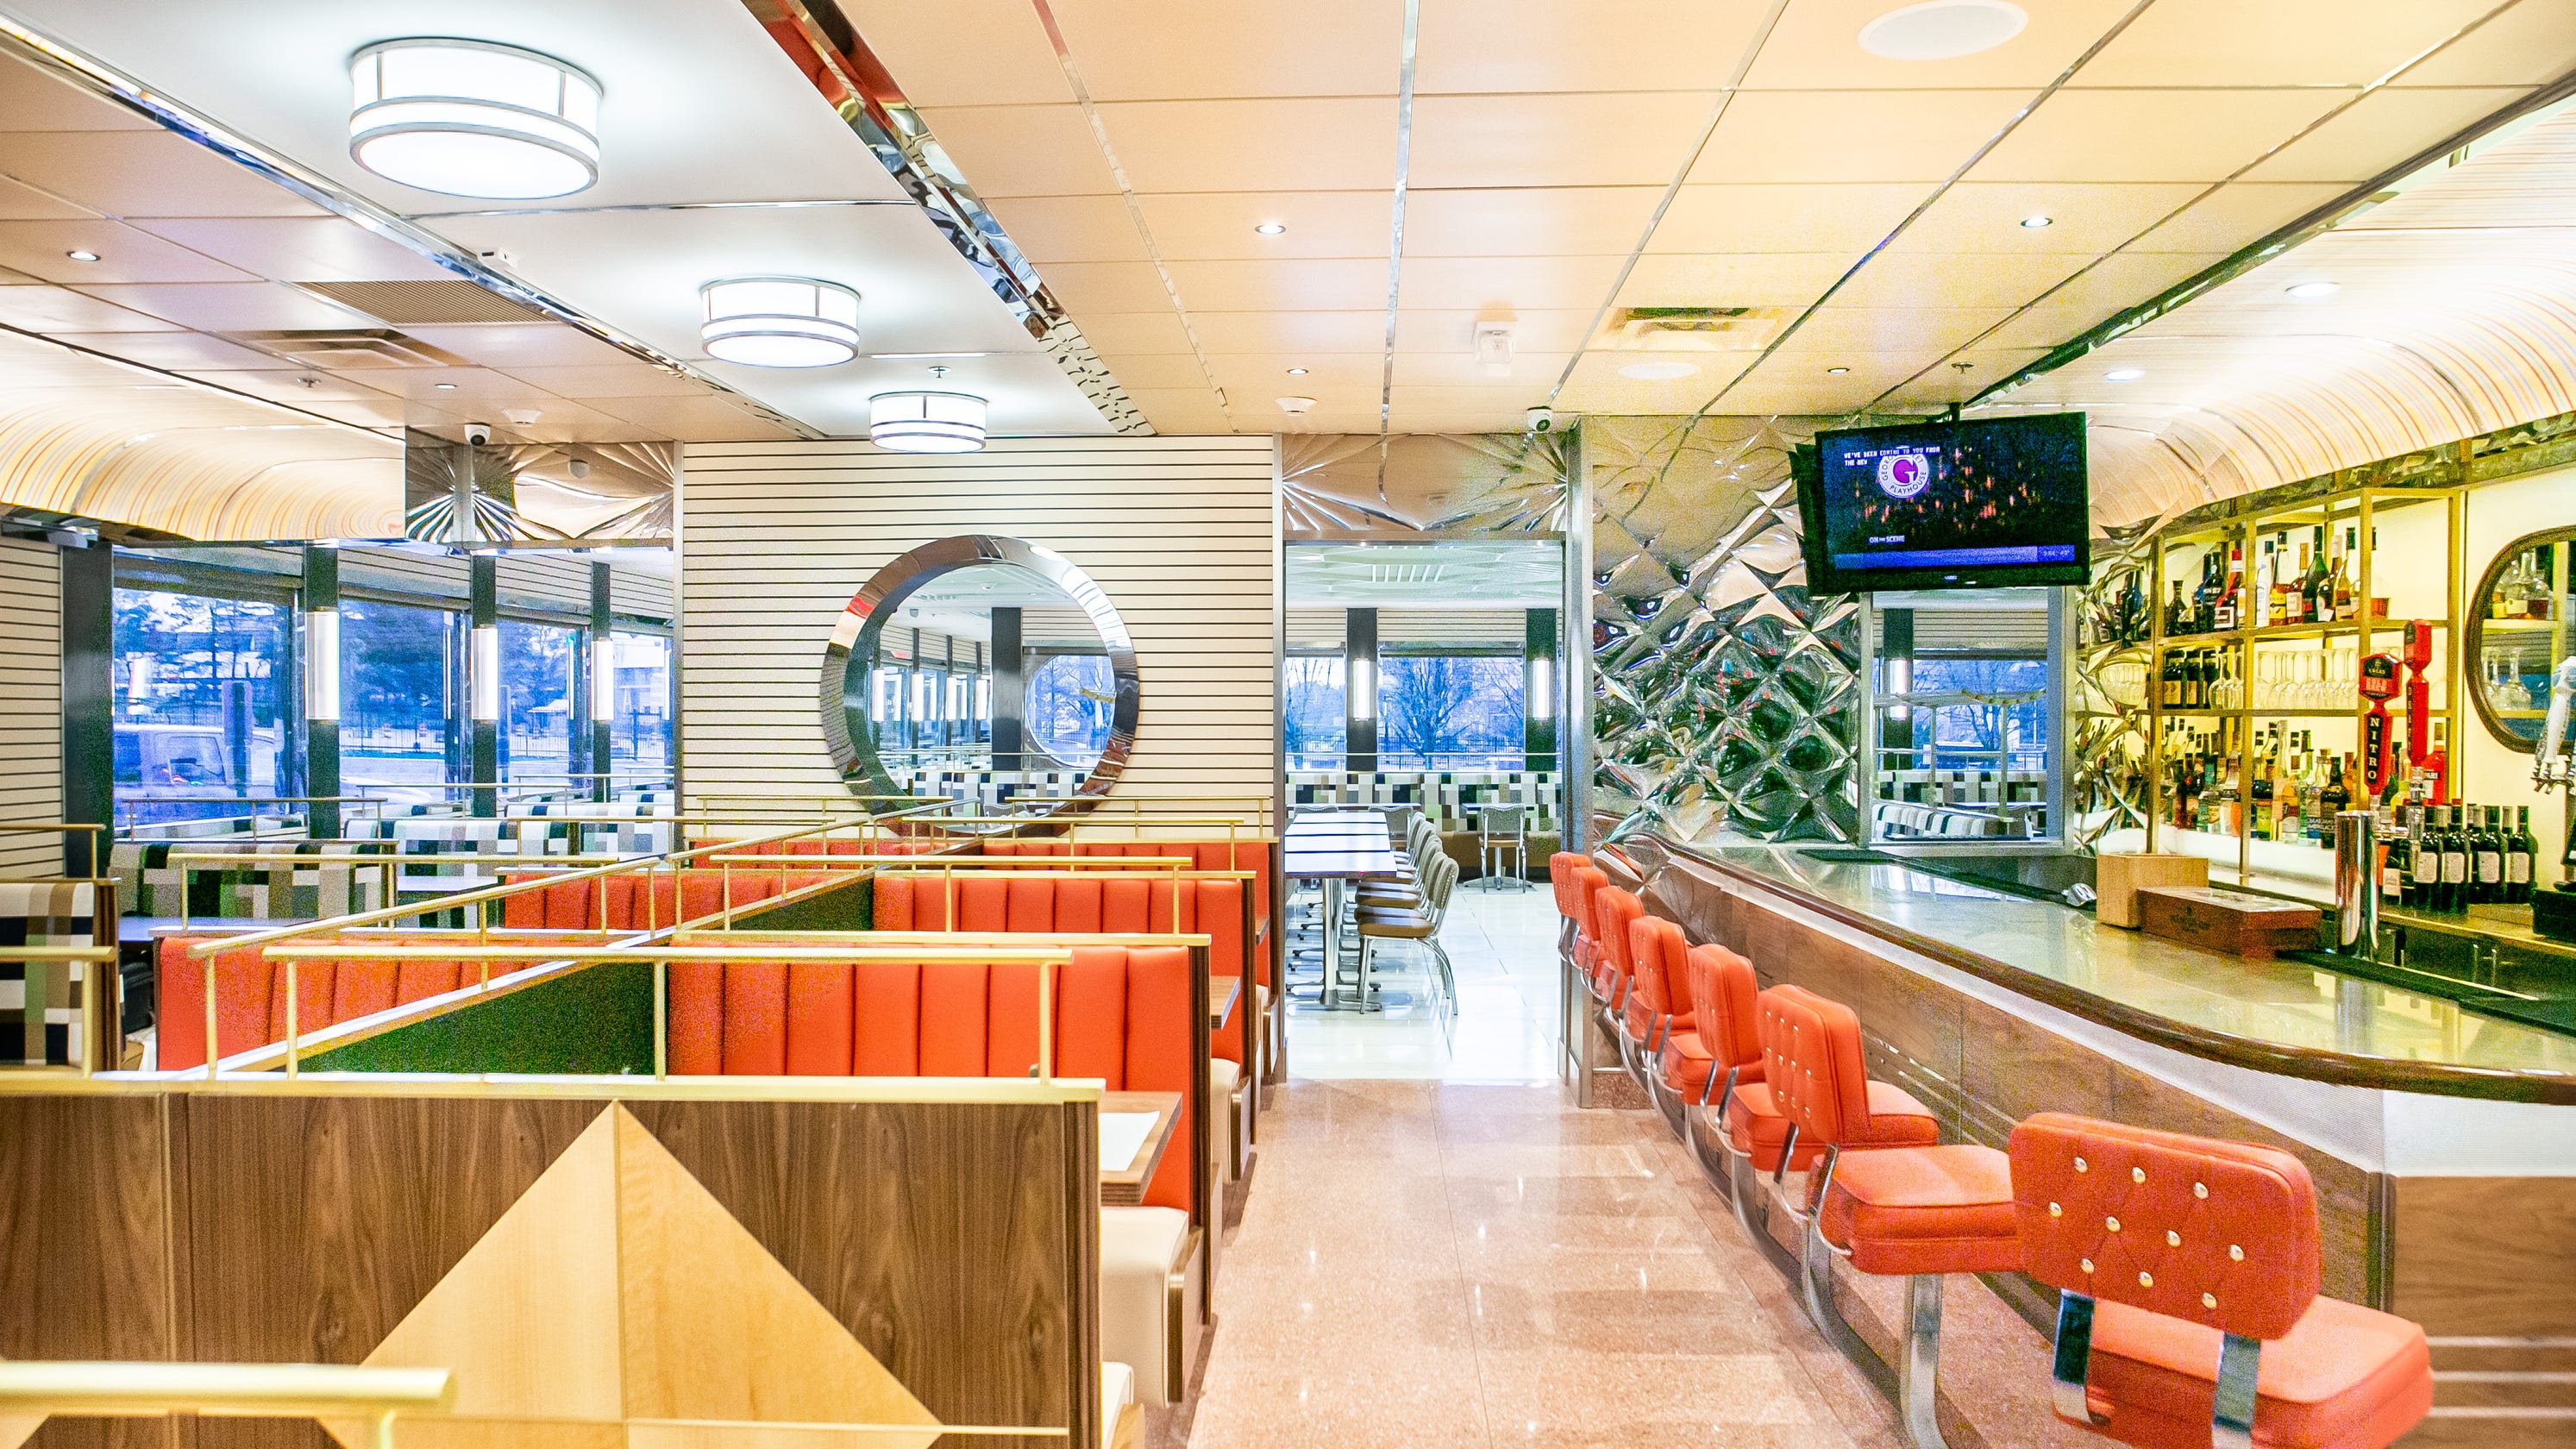 Tick Tock Diner has reopened with a new look, new chef, new menu